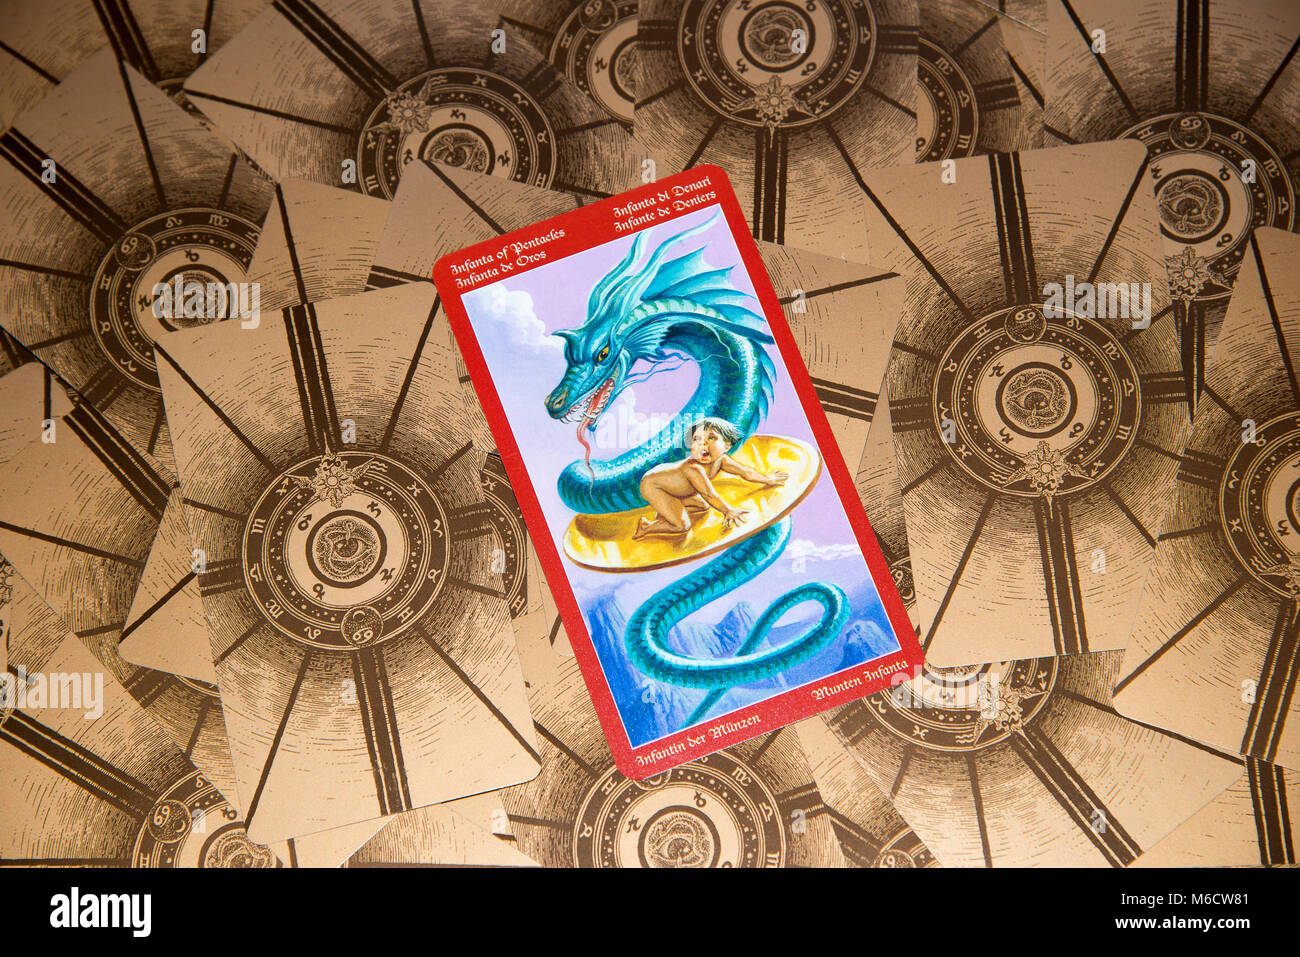 Moscow, Russia - February 18, 2018: Tarot card Page of Pentacles. Dragon tarot deck. Esoteric mysterious background in gothic style Stock Photo